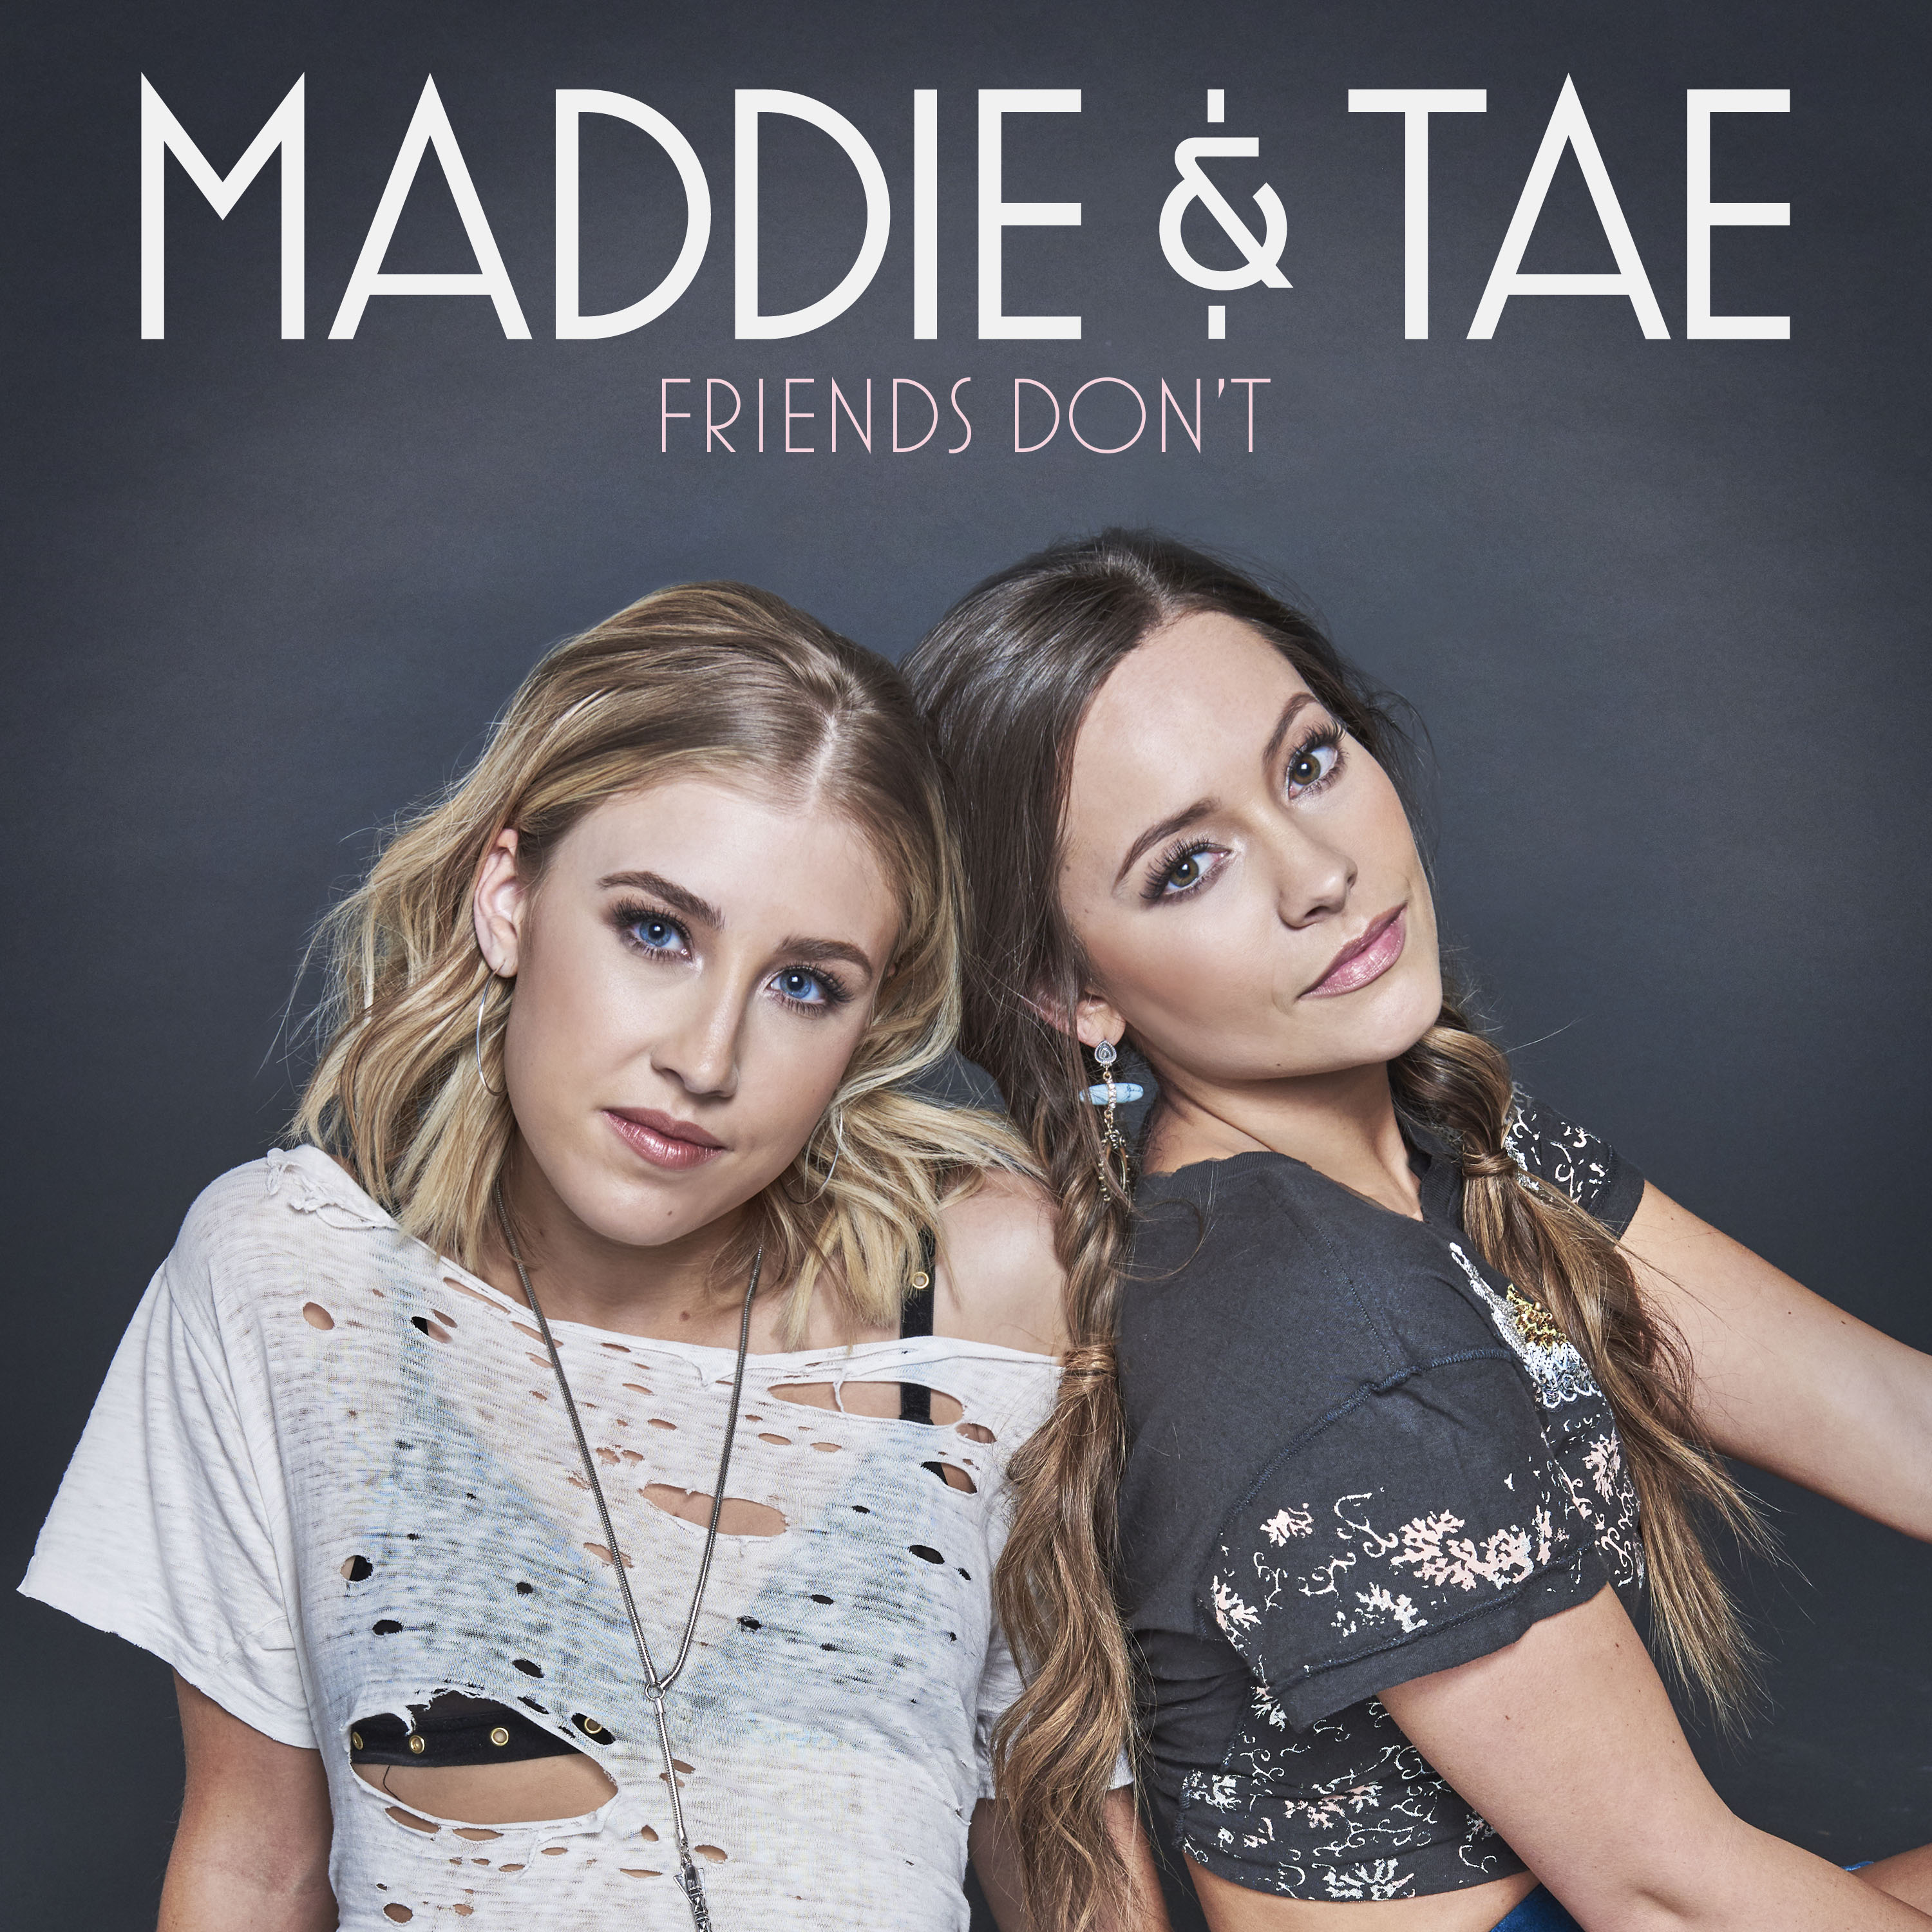 Maddie & Tae Come Back Strong on ‘Friends Don’t’ Sounds Like Nashville